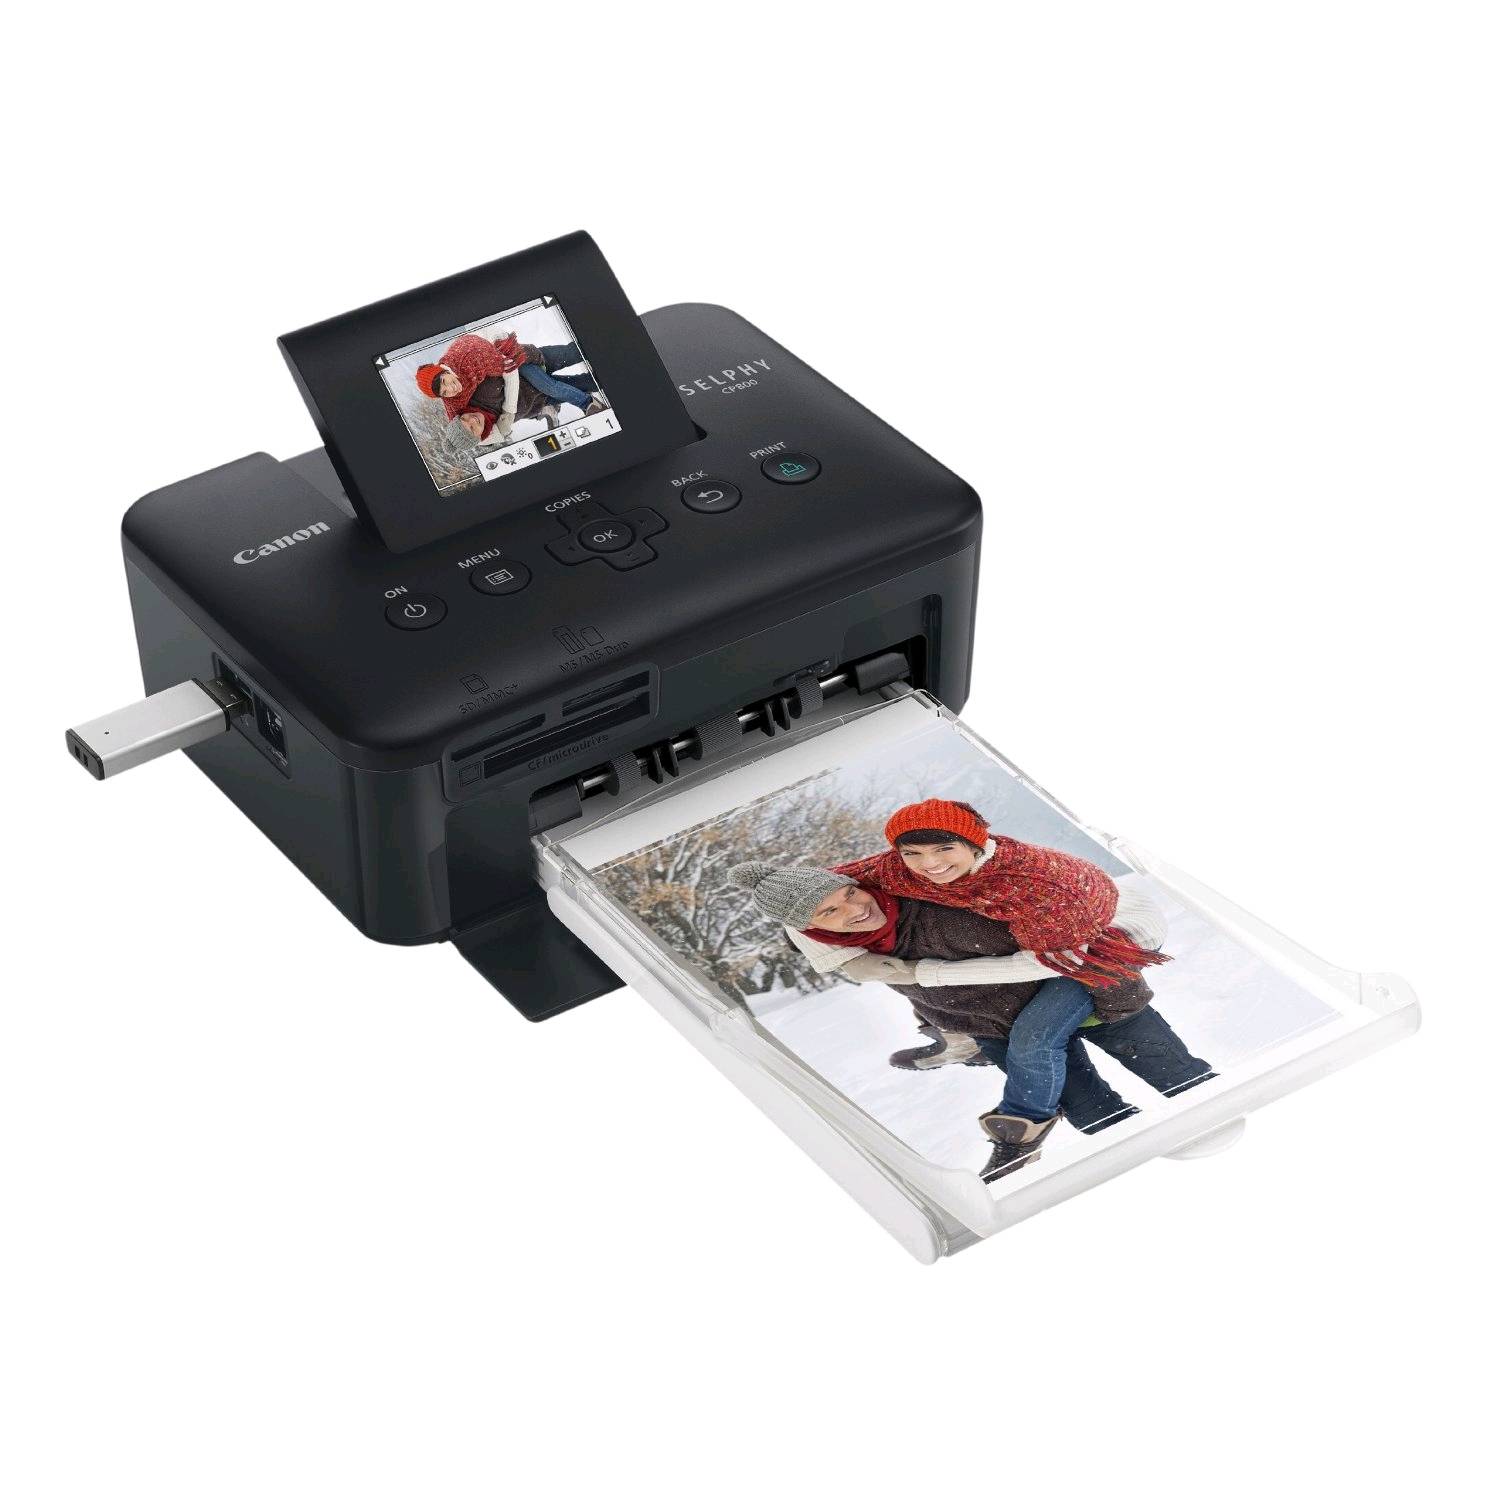 Instagramers Tests The New Canon Selphy Cp900 Compact Photo Printer 9286